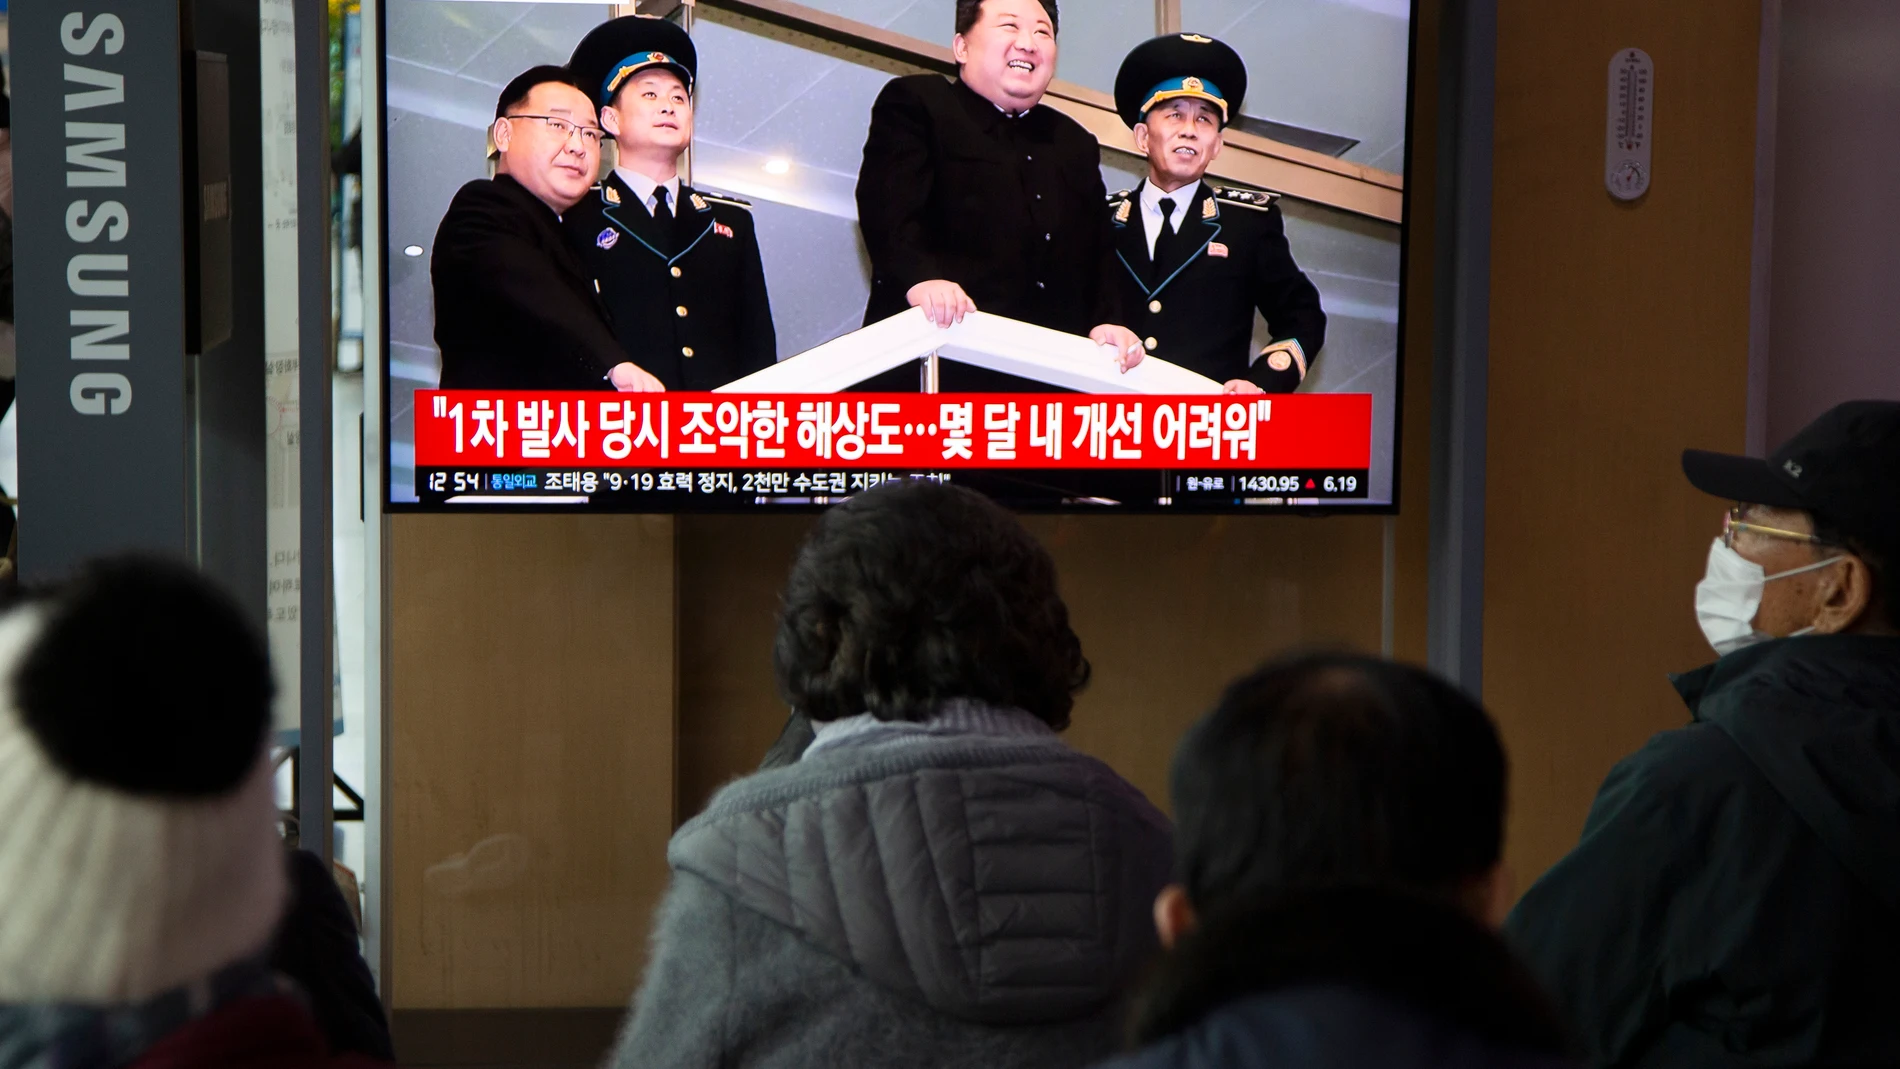 Seoul (Korea, Republic Of), 27/11/2023.- People watch as North Korean Leader Kim Jong Un appears on a TV monitor displaying daily news at a station in Seoul, South Korea, 27 November 2023. According to a statement by South Korean military officials made on 27 November, North Korea deployed troops and equipment to Demilitarized Zone (DMZ) ground posts after the North vowed to resume all military measures halted under a 2018 deal. (Corea del Sur, Seúl) EFE/EPA/JEON HEON-KYUN 